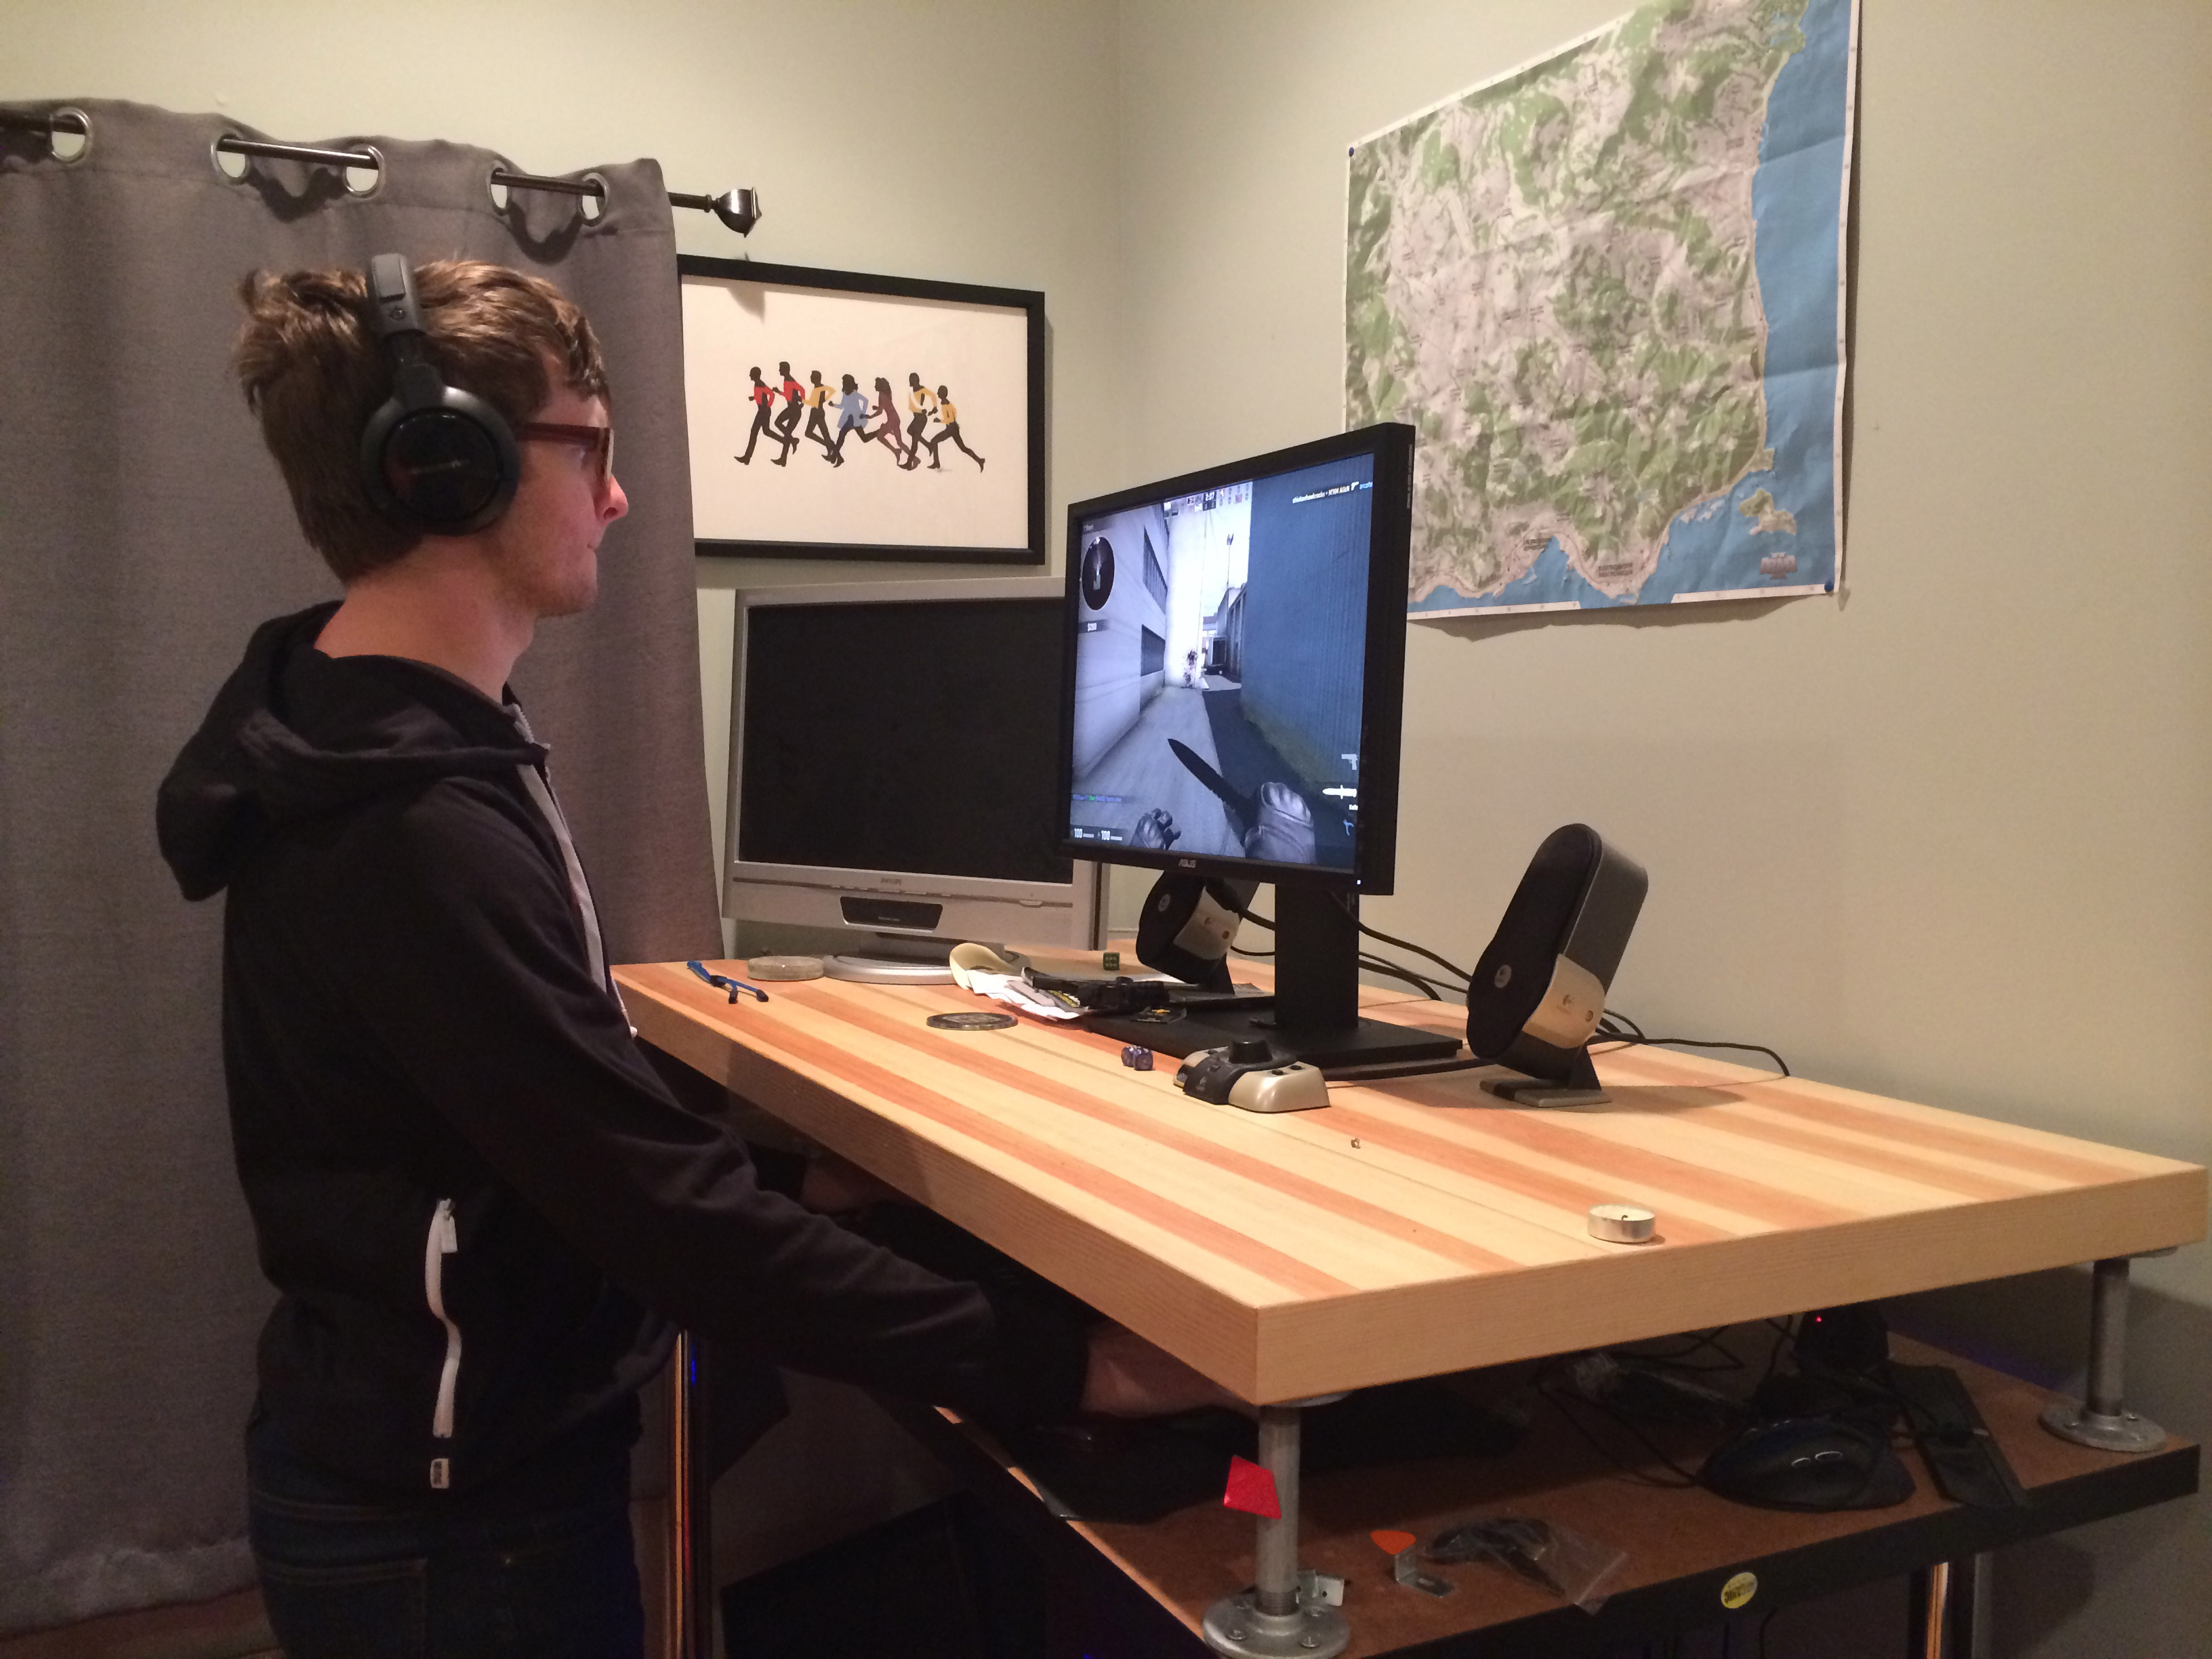 Ultimate Gaming Setup with Your Standing Desk